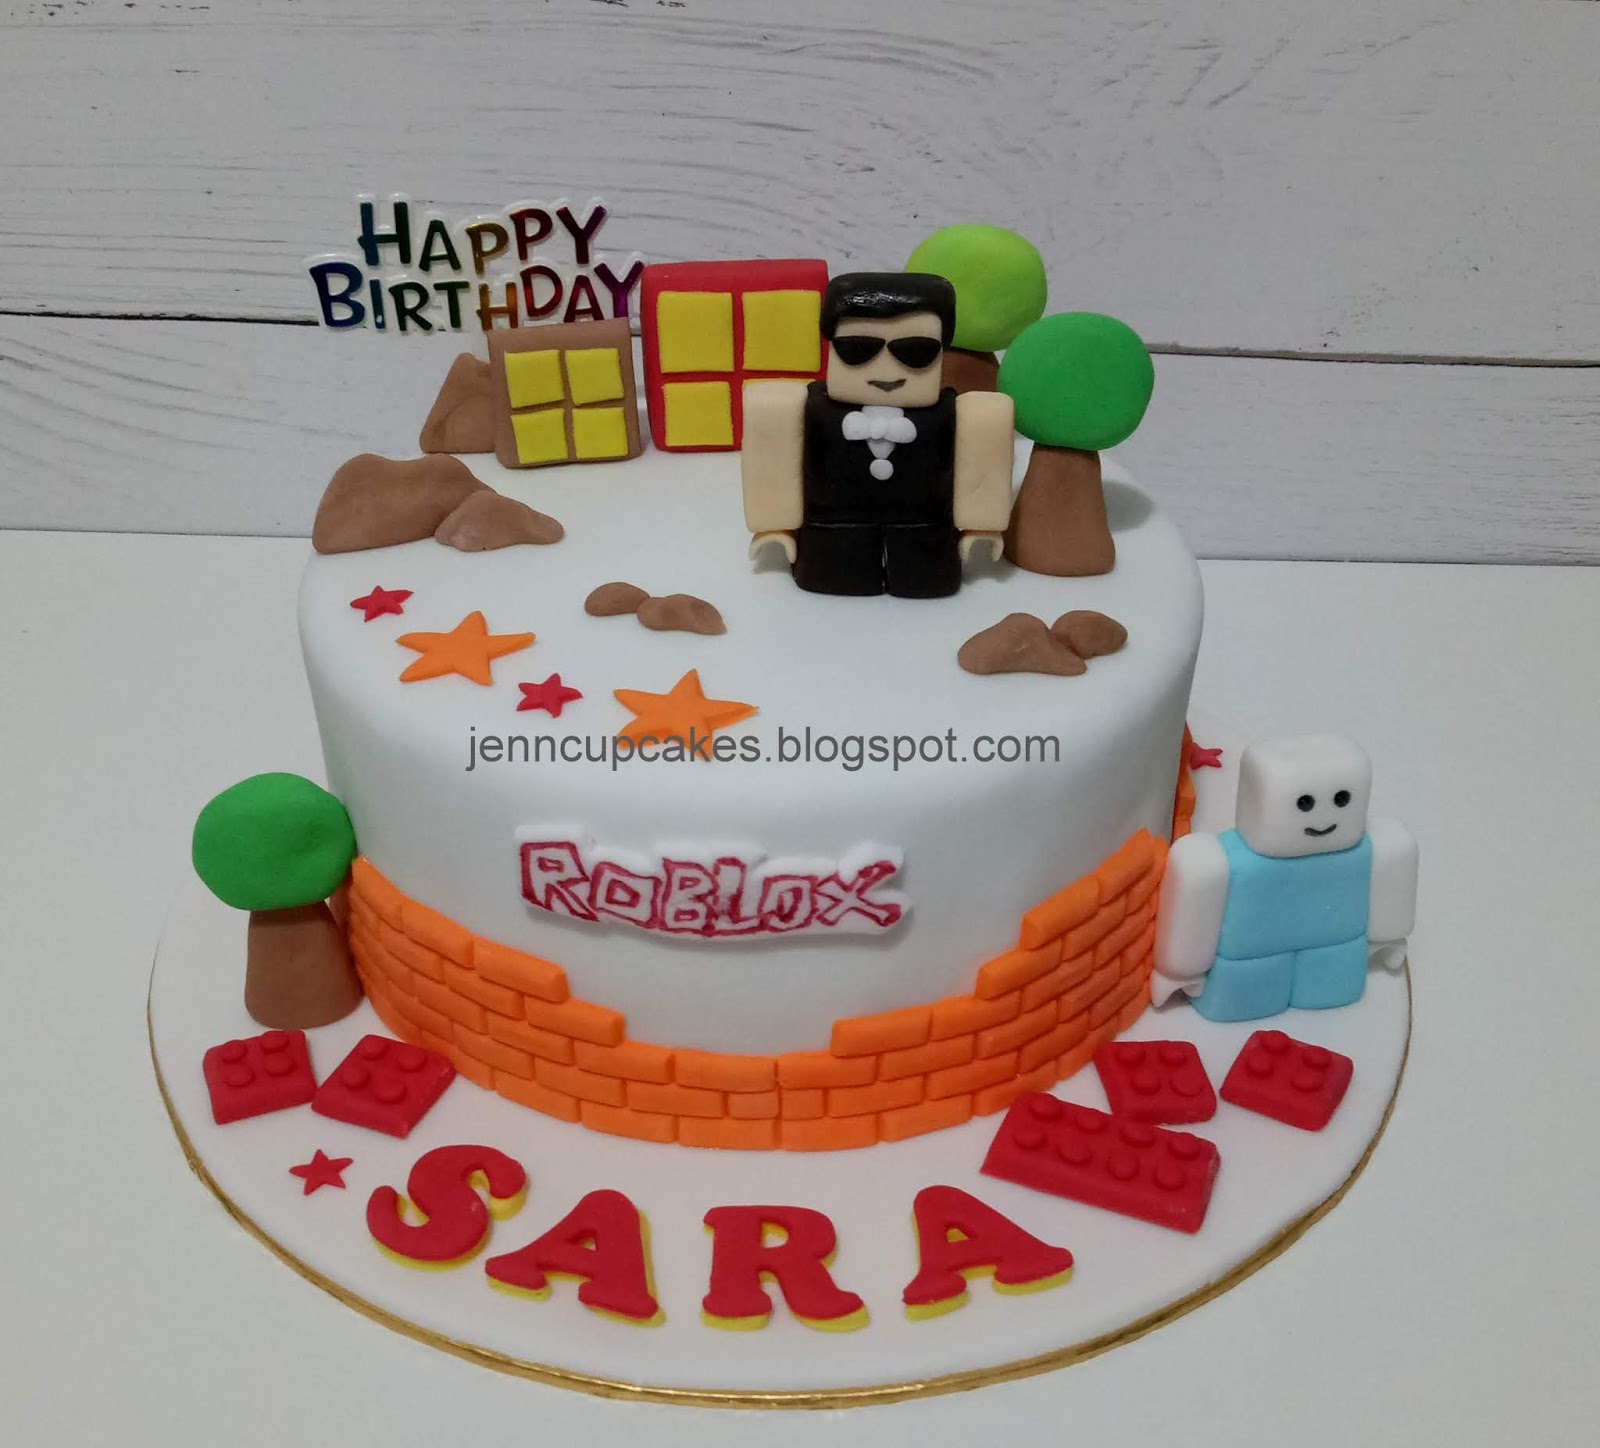 Roblox Cake Ideas For Girls Buxgg Safe - roblox cards kmart roblox free rthro